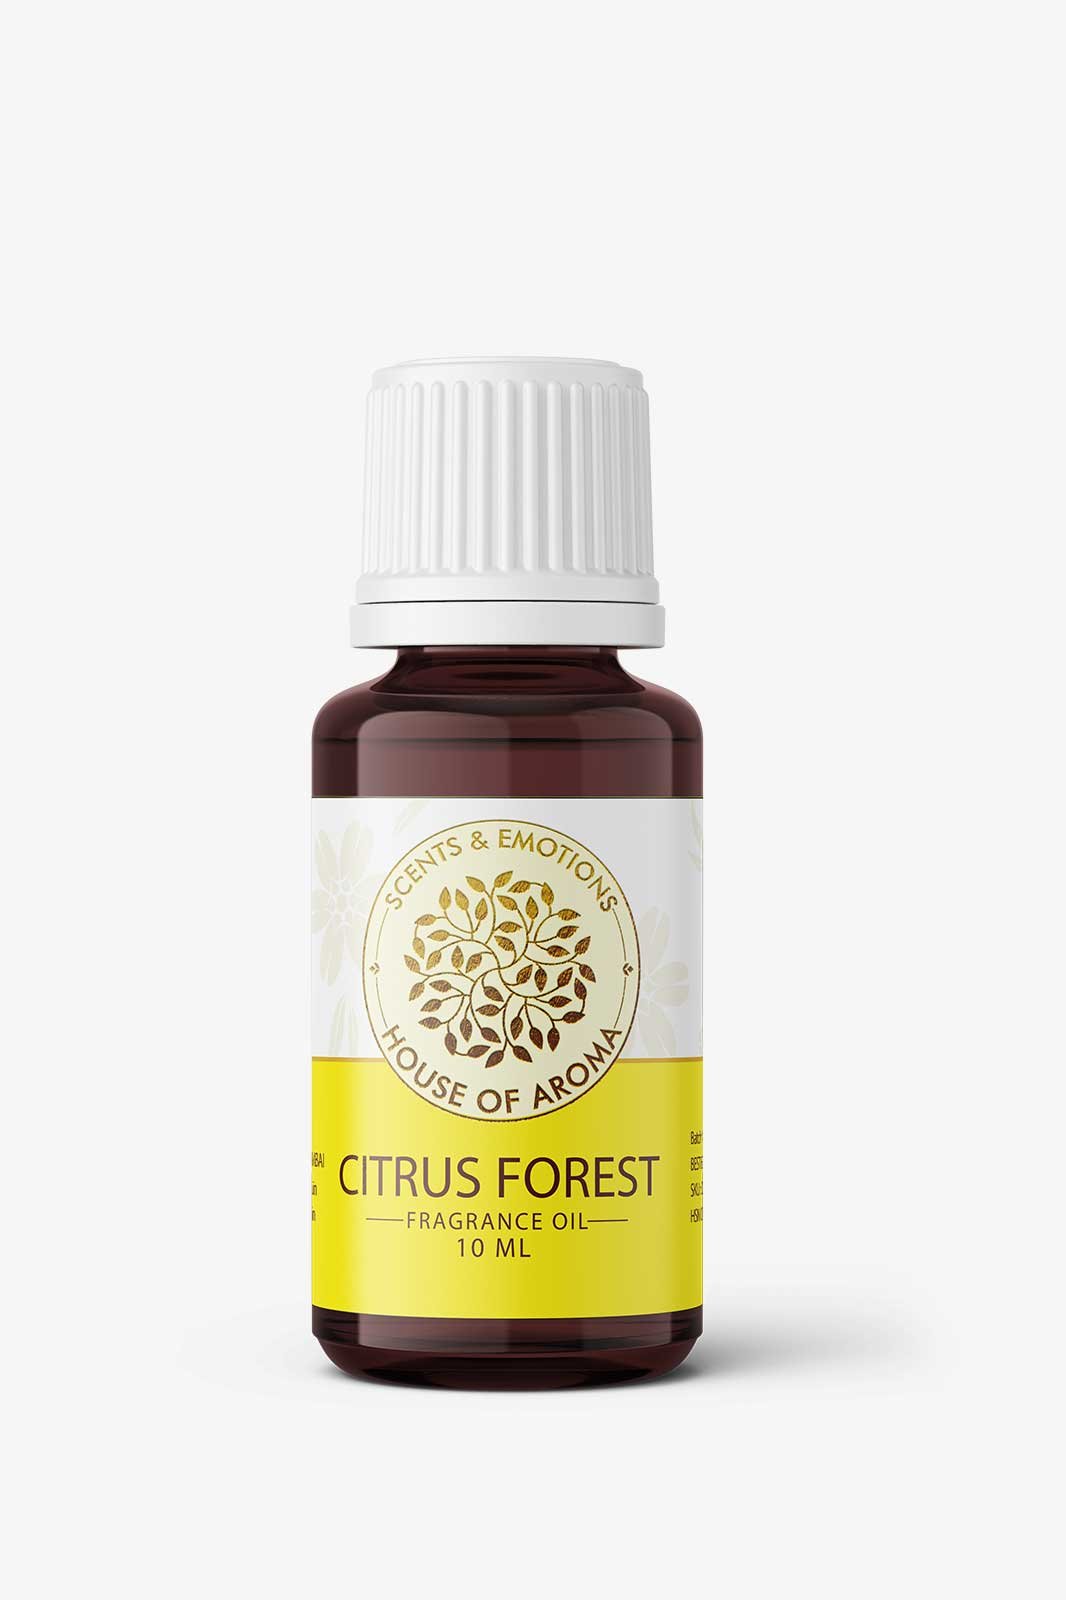 citrus forest synthetic oil, citrus forest fragrance oil, citrus fragrance oil, citrus fresh perfume, lemon fragrance oil, citrus flavour perfume, citrus fragrance oil for candles, citrus mint fragrance oil, lemon citrus fragrance oil,top fragrance companies in india, fragrance oil for diffuser, , fragrance oil for reed diffuser, fragrance oil for water diffuser, House of aroma, fragrance oil, fragrance oils, fragrance oils for candles, fragrance oils for soap, fragrance oil for perfume, fragrance oil on skin, fragrance oil uses, fragrance oil manufacturers, fragrance oil for incense sticks, fragrance oil online, fragrance oil air freshener, fragrance oil benefits, premium fragrance oil brand, top fragrance brands in the world, premium fragrance oil for candles, premium quality fragrance oils, best fragrance brand in the world, top 10 luxury fragrance brands, fragrance oil brands, top fragrance companies in india, fragrance brands in india, fragrance oil suppliers in india, best fragrance oil brands for candles, best aroma oil brands in india, best fragrance oil brands, world's best fragrance brands, aroma oil brands, fragrance oil brands in india, top fragrance oil brands, brands of fragrance oil, fragrance oil for diffuser, fragrance oil for reed diffuser, fragrance oil for mist diffuser, fragrance oil for electric diffuser, aroma oil or essential oil, fragrance oil for water diffuser, fragrance oil or essential oil for wax melts, fragrance oil diffuser set, fragrant oil for diffuser